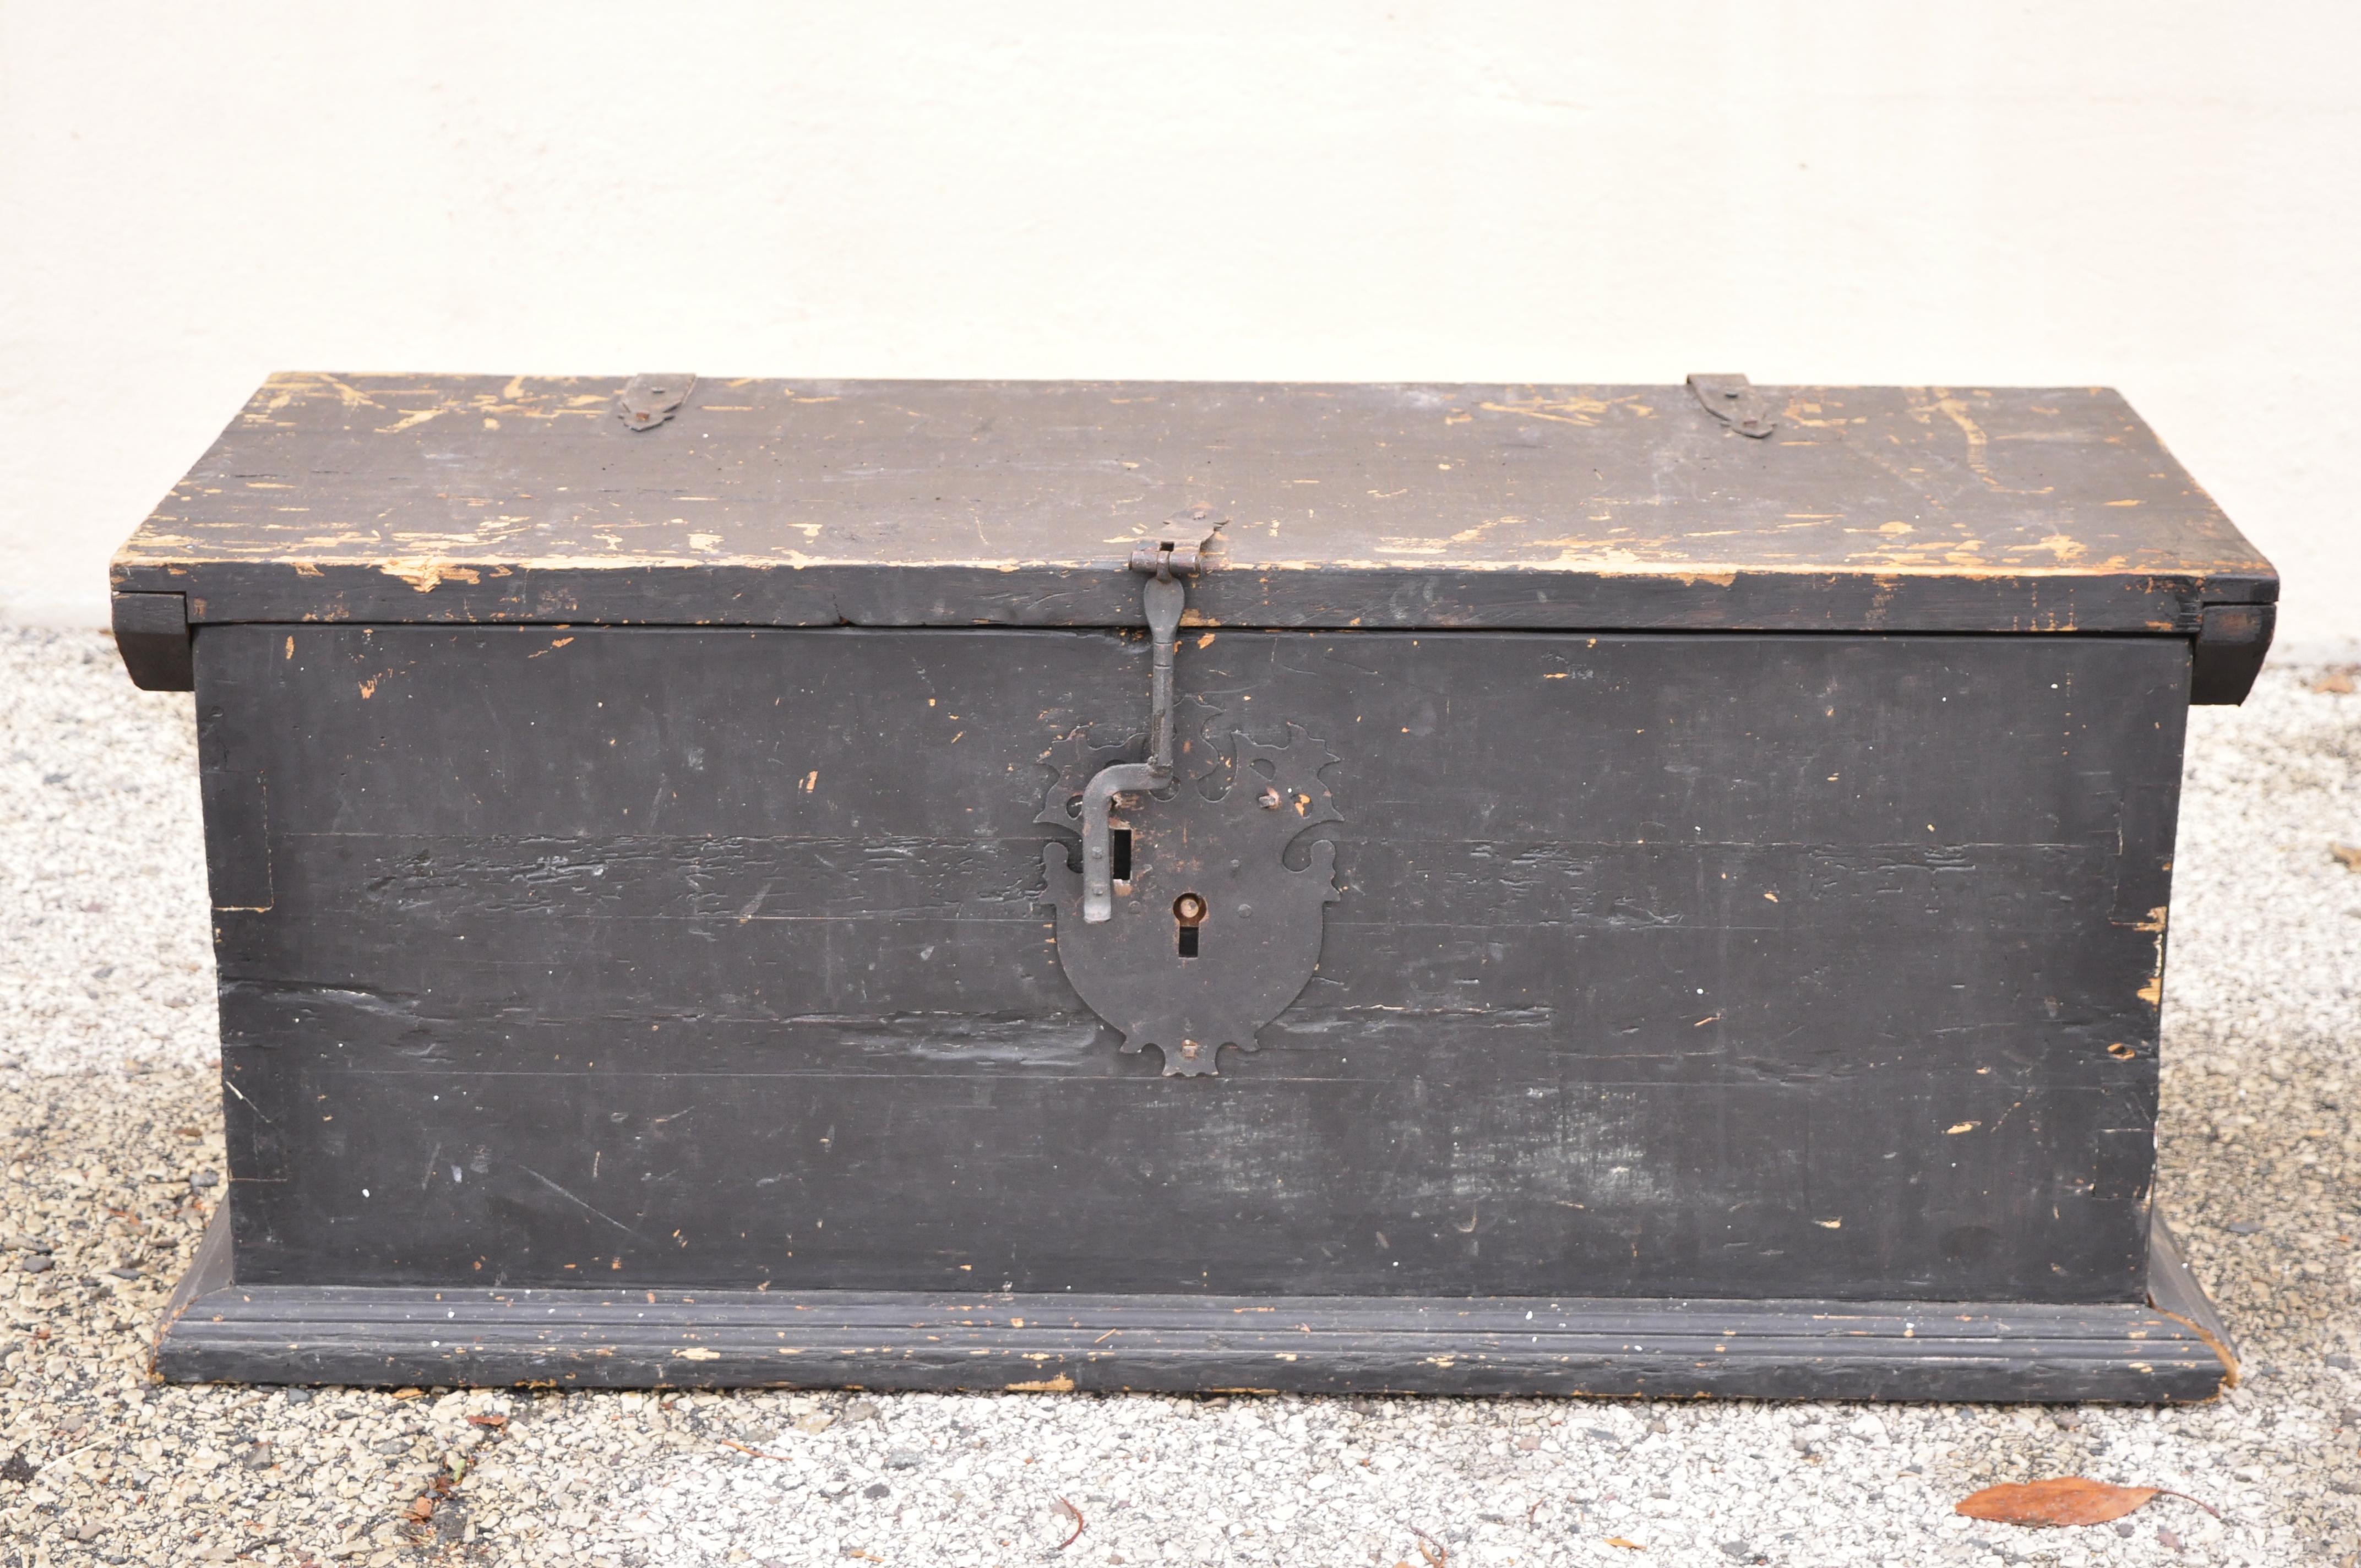 Vintage black pine wood Mexican rustic blanket chest trunk. Item features cast iron hardware, solid wood construction, distressed finish. Circa mid to late 20th century. Measurements: 16